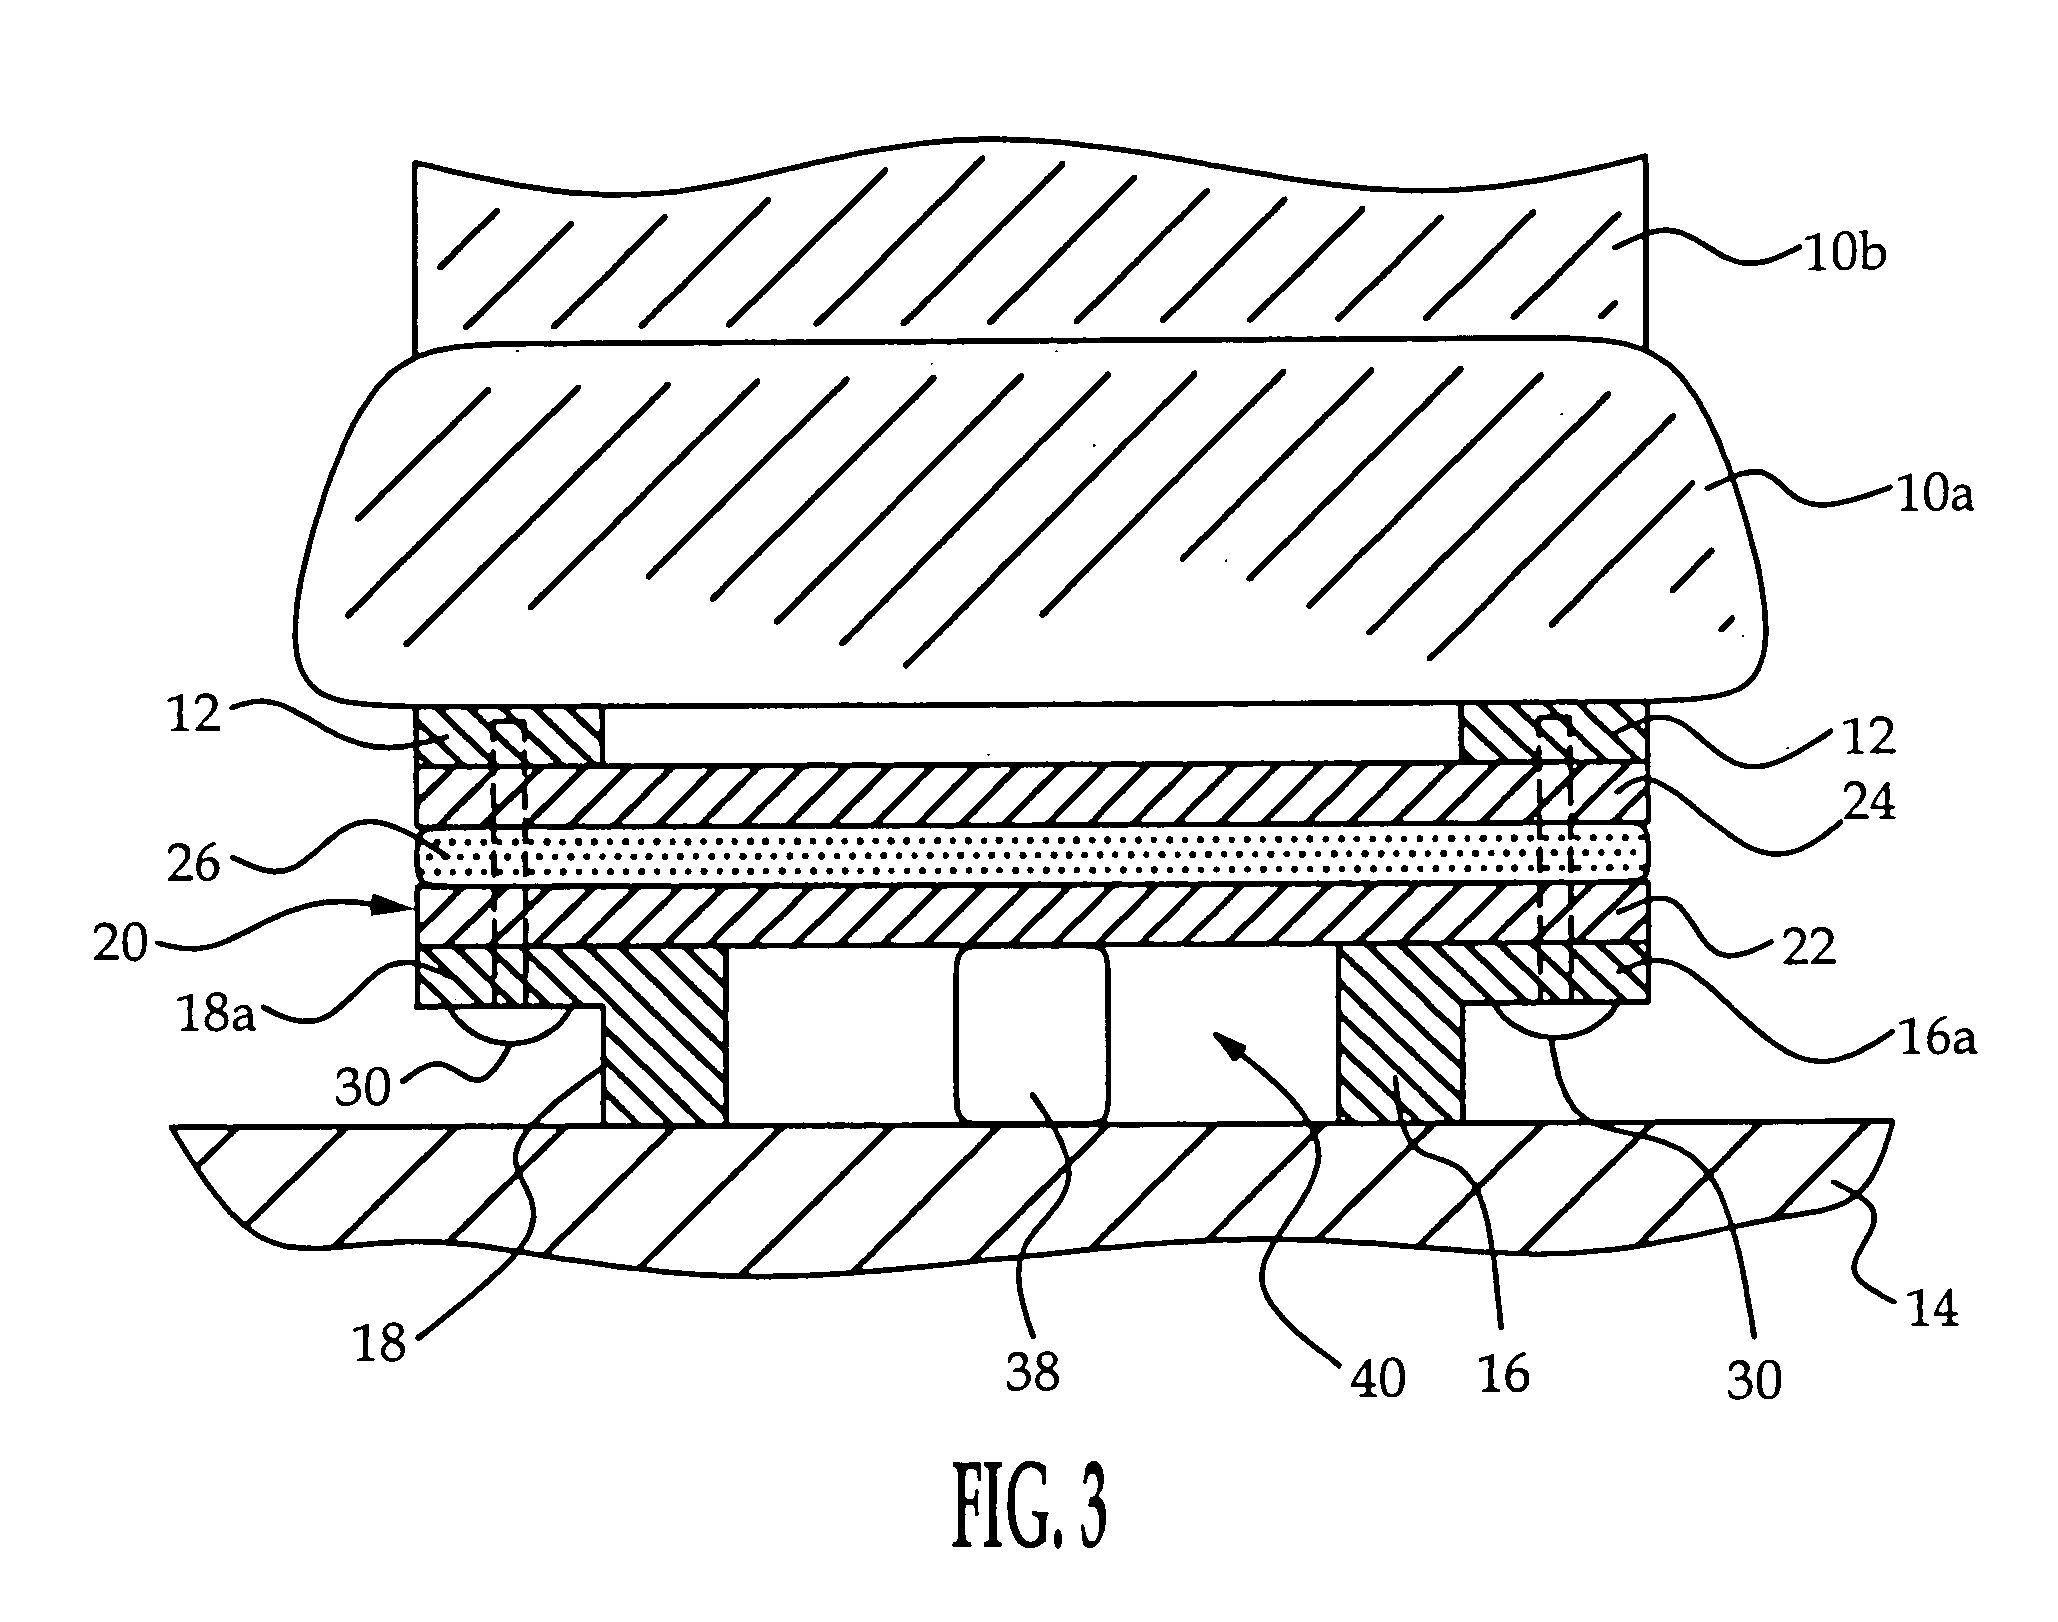 Frame-based bladder apparatus for seat occupant weight estimation